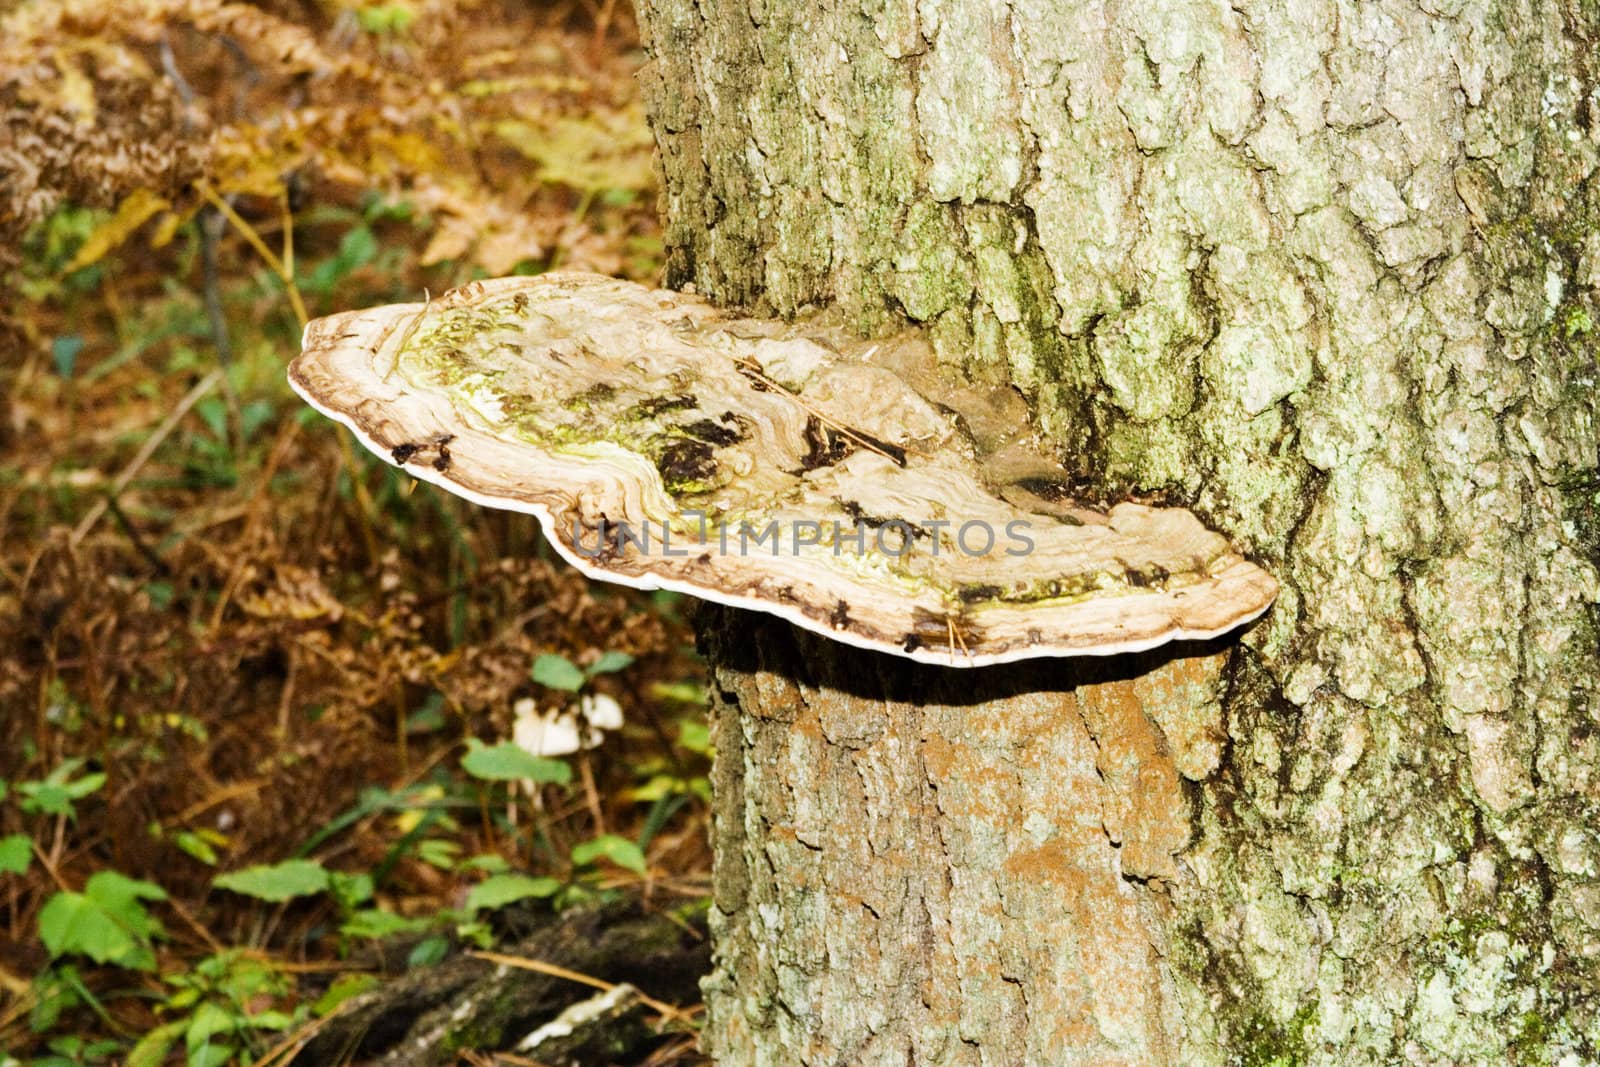 oak tree with large fungus growing out of the side of the tree